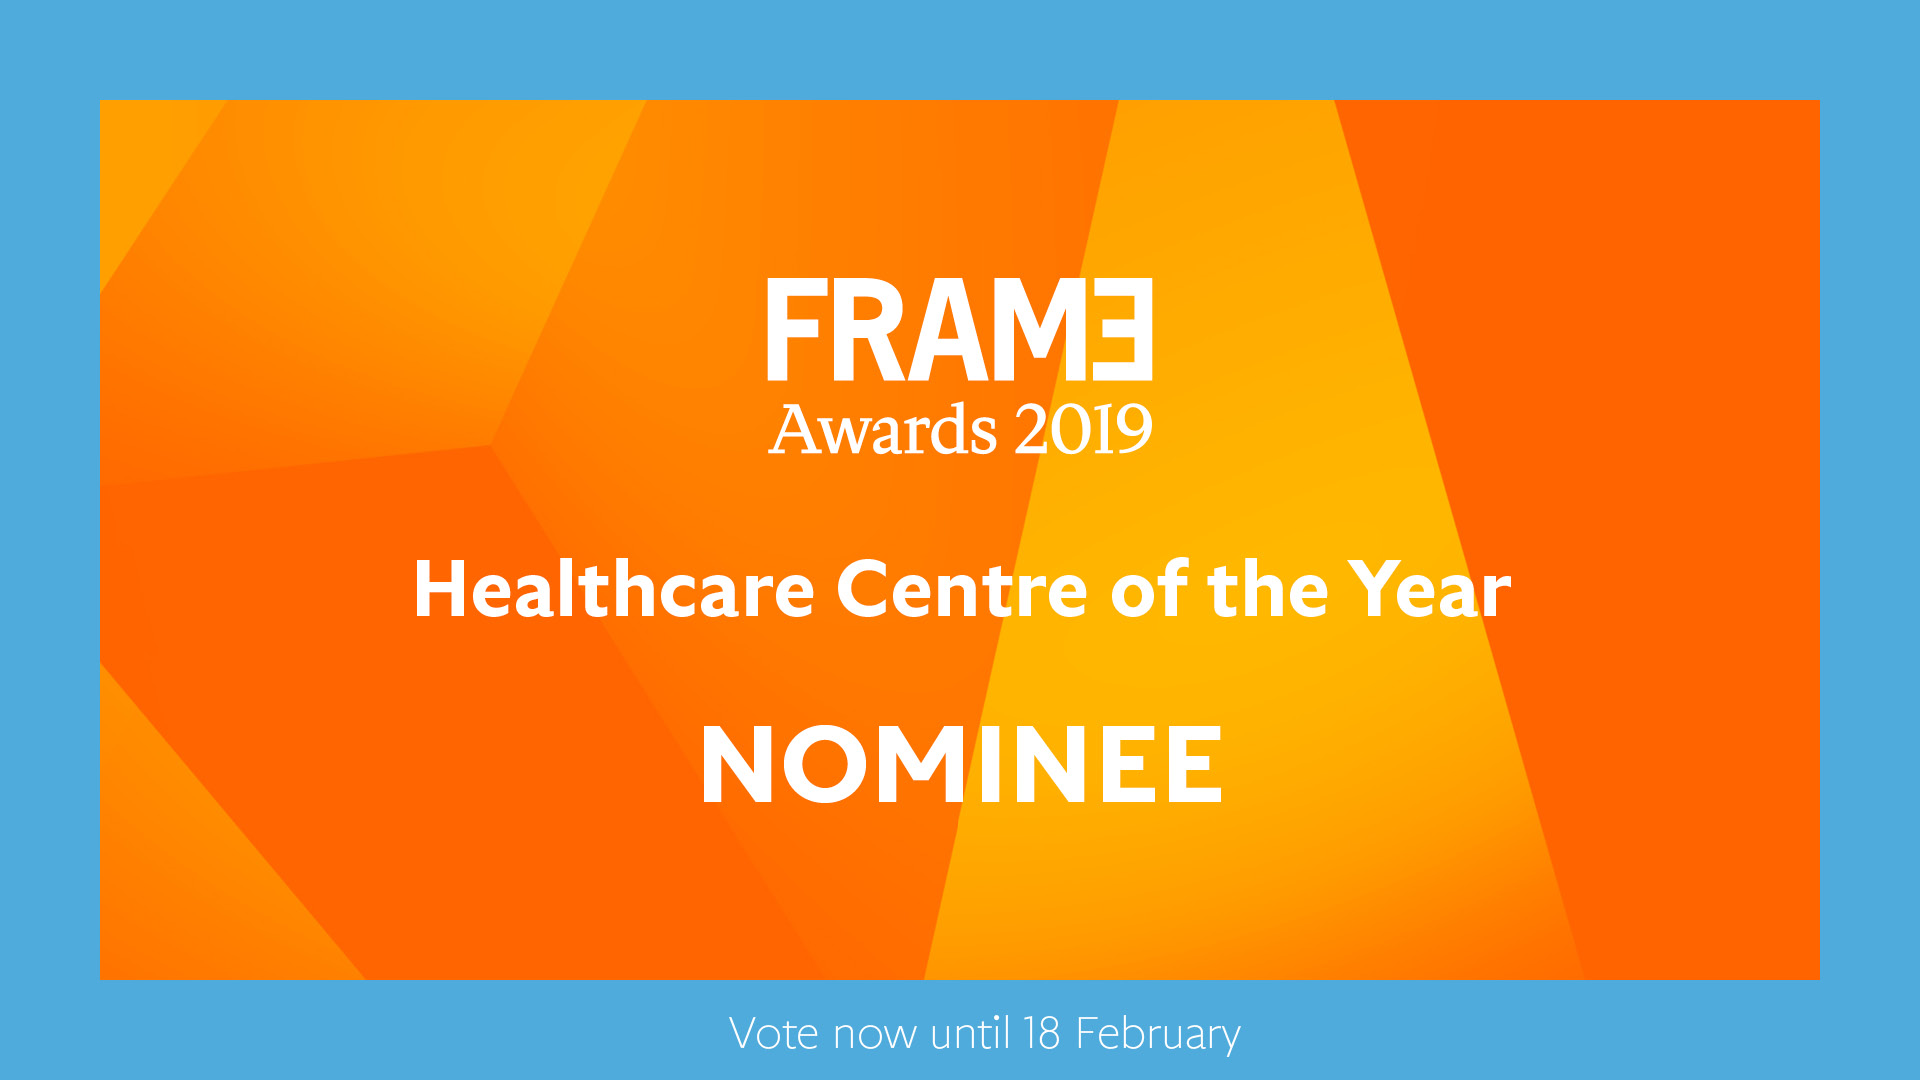 Healthcare Centre of the Year